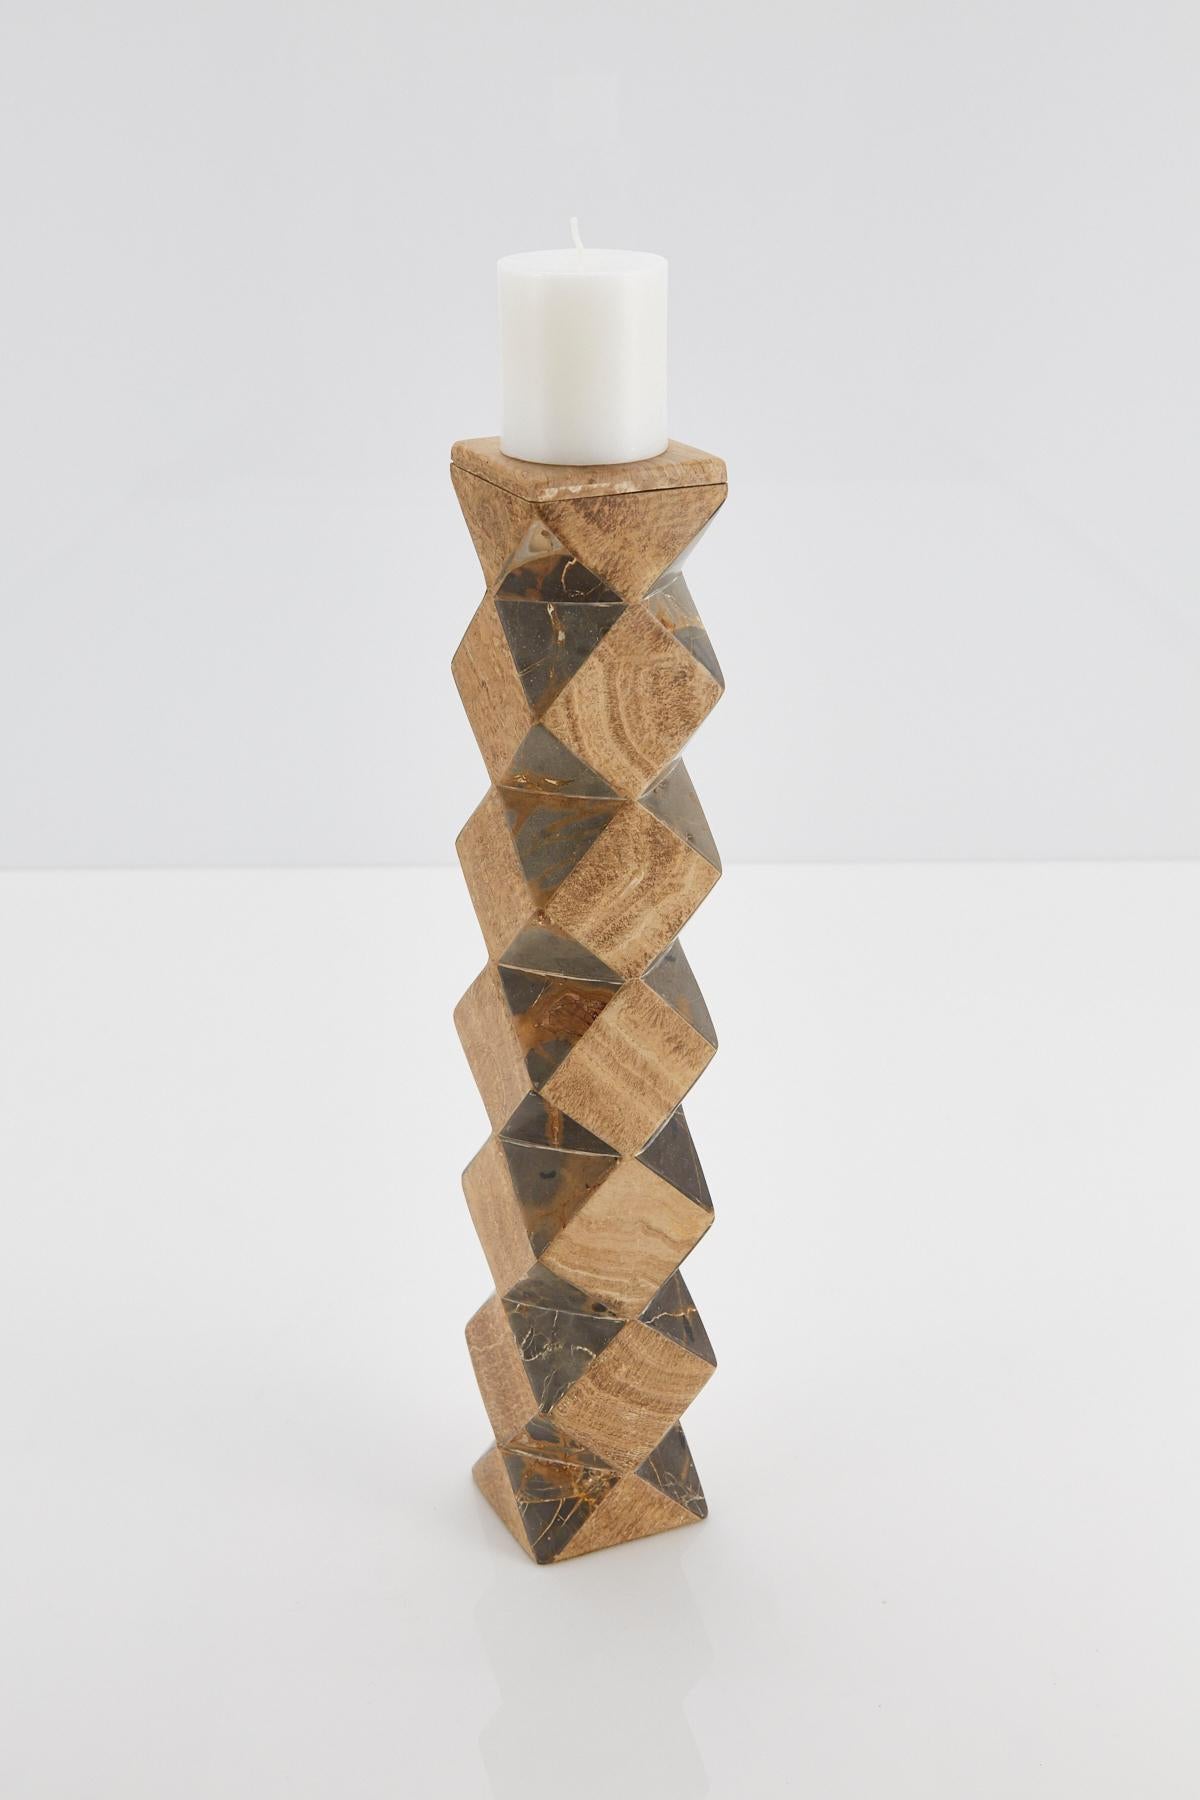 Tall Convertible Faceted Postmodern Tessellated Stone Candlestick or Vase, 1990s (Philippinisch) im Angebot